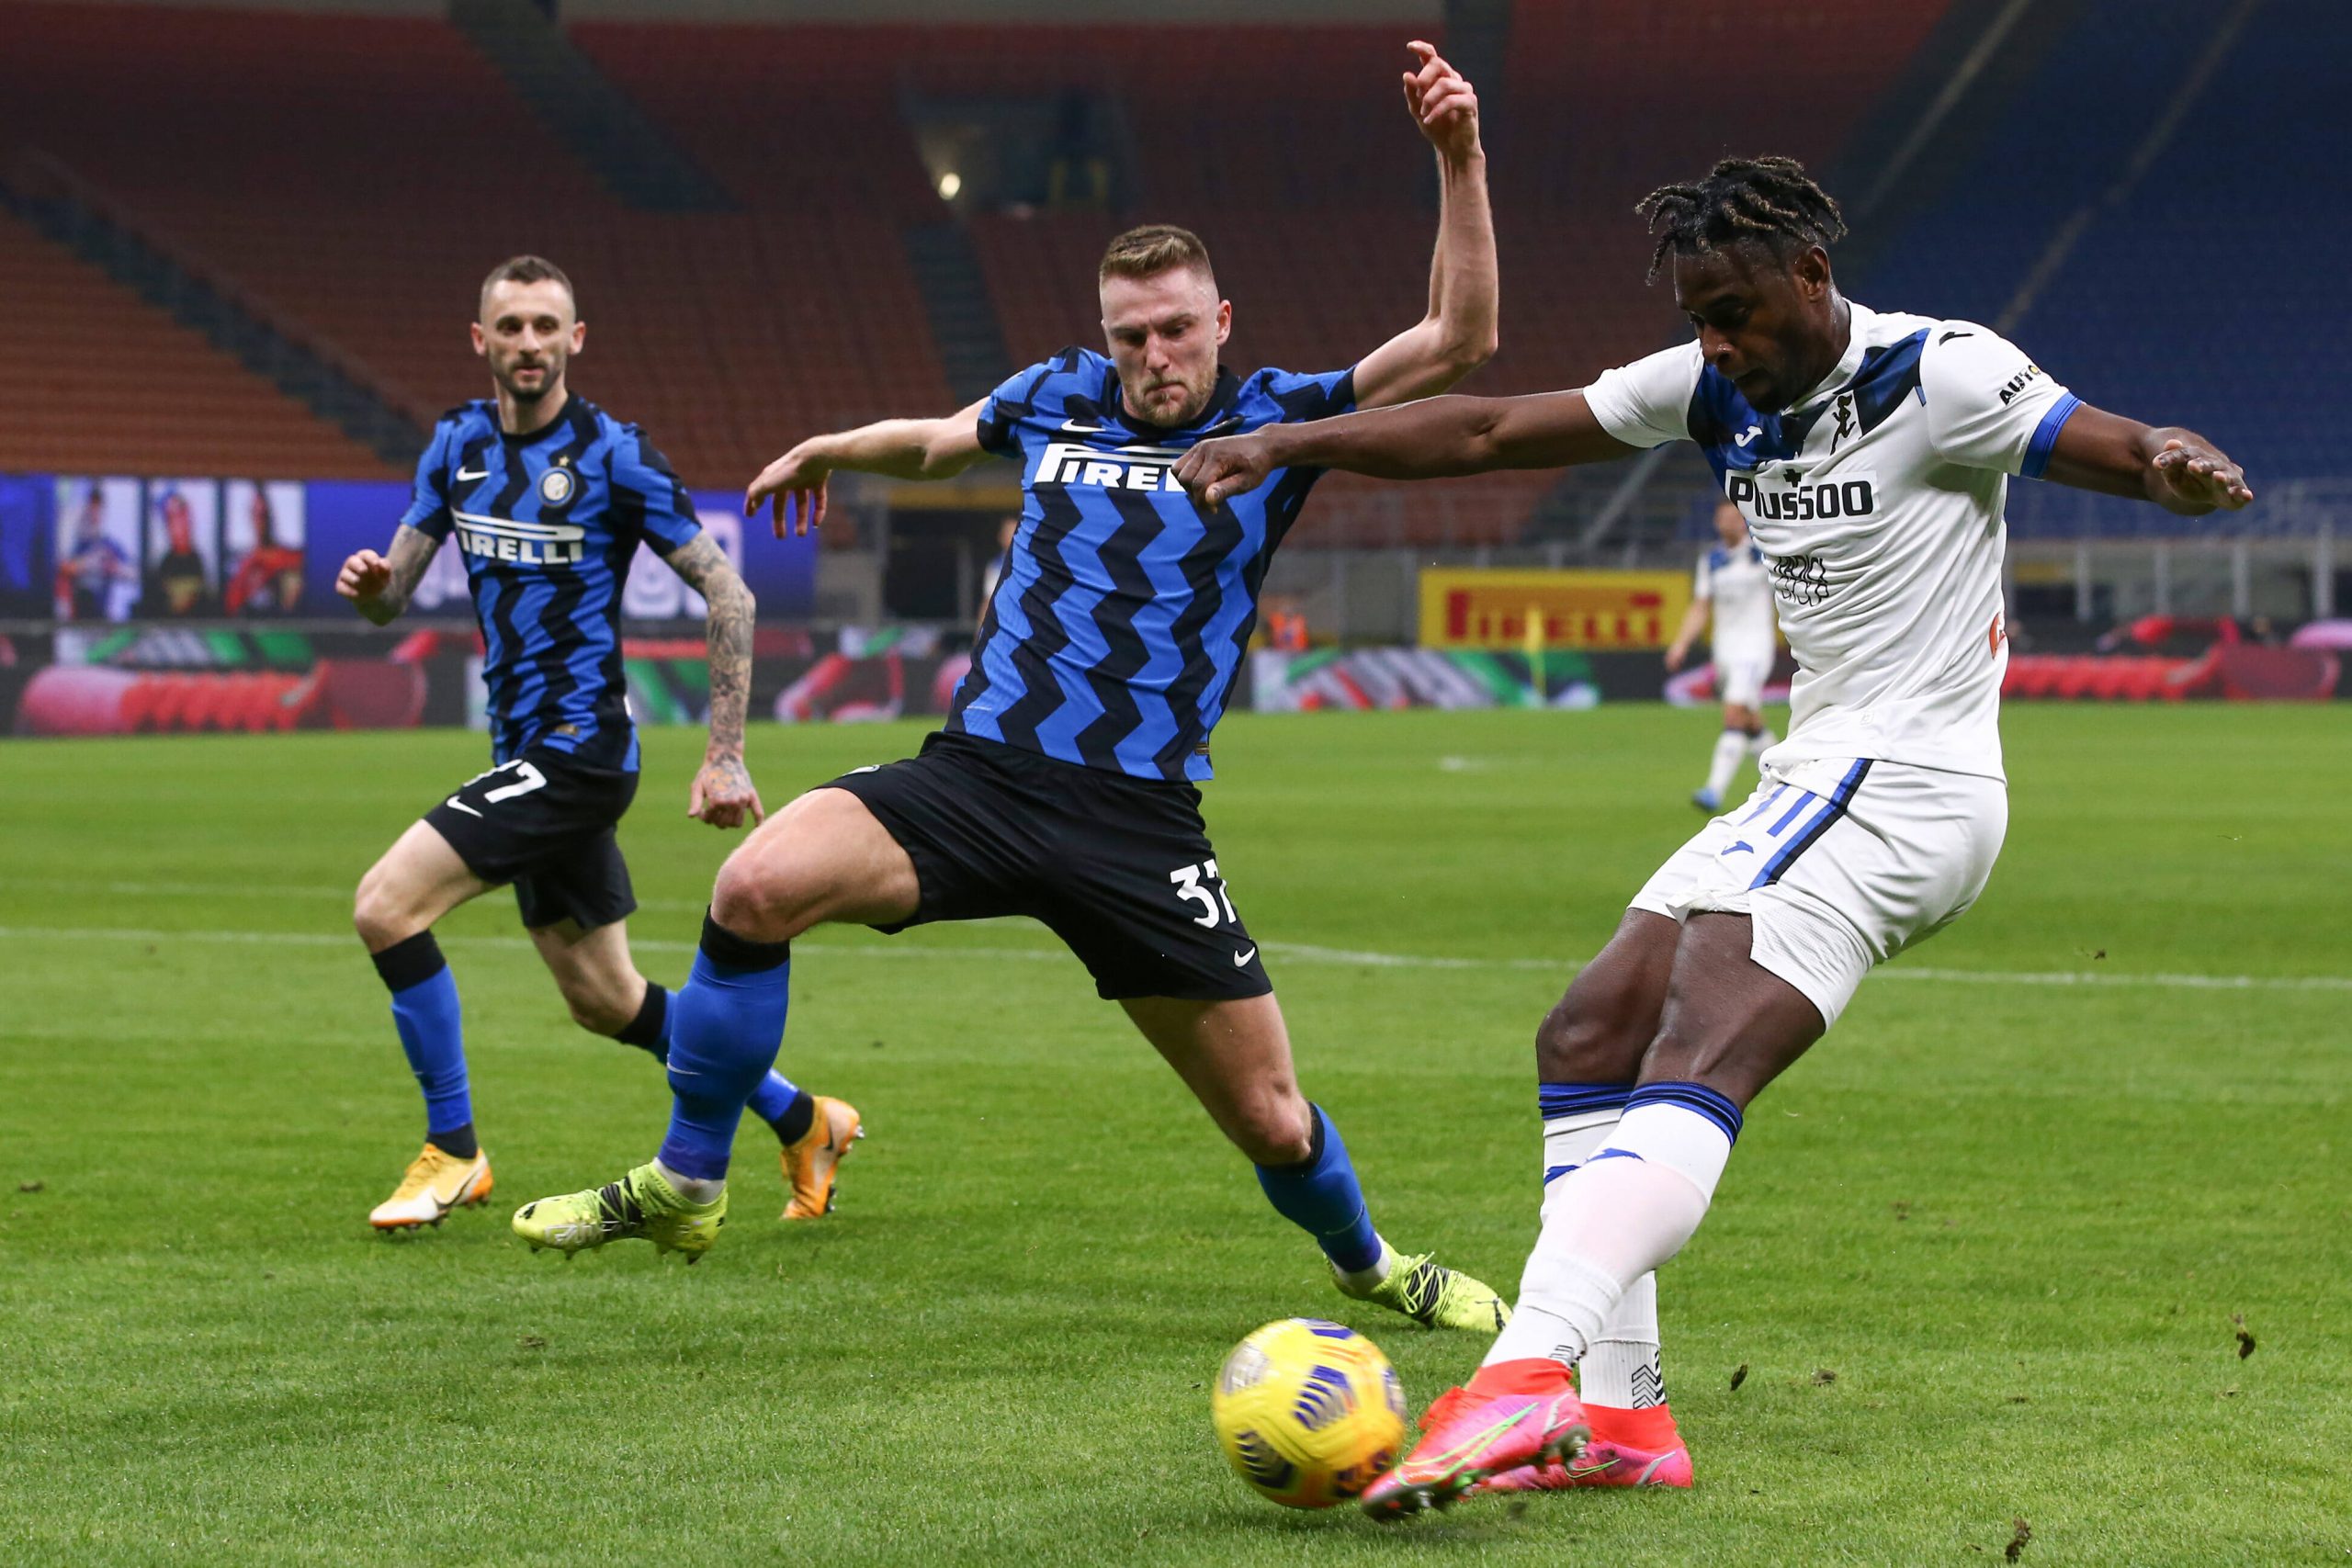 Milan Skriniar of Internazionale closes in on Duvan Zapata of Atalanta as he attempts to cross the ball during the Serie